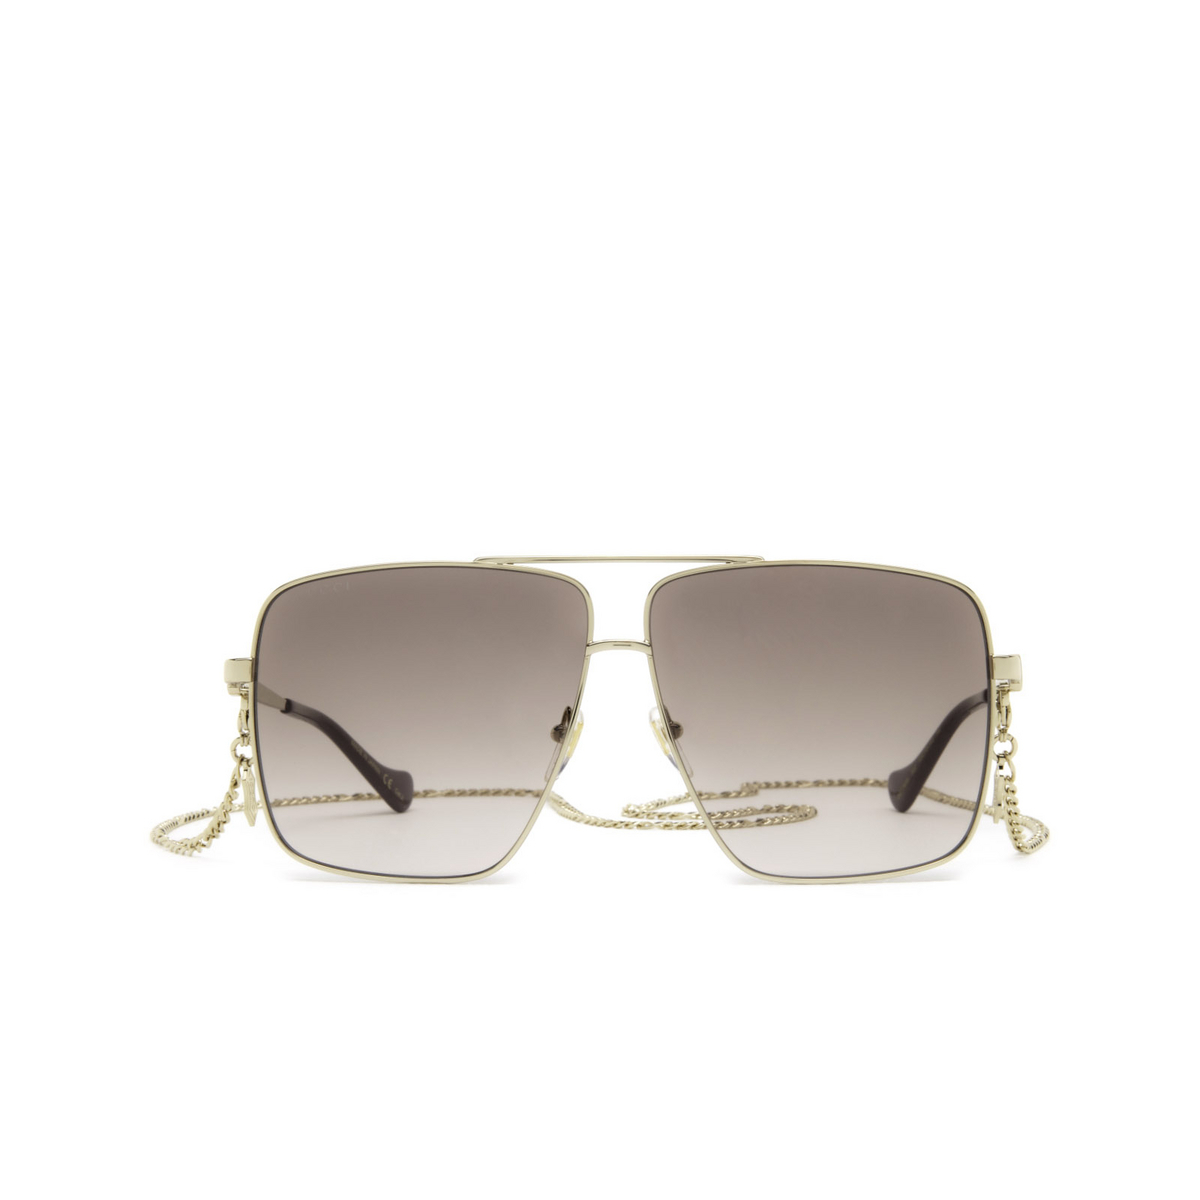 Gucci® Irregular Sunglasses: GG1087S color Gold 002 - front view.